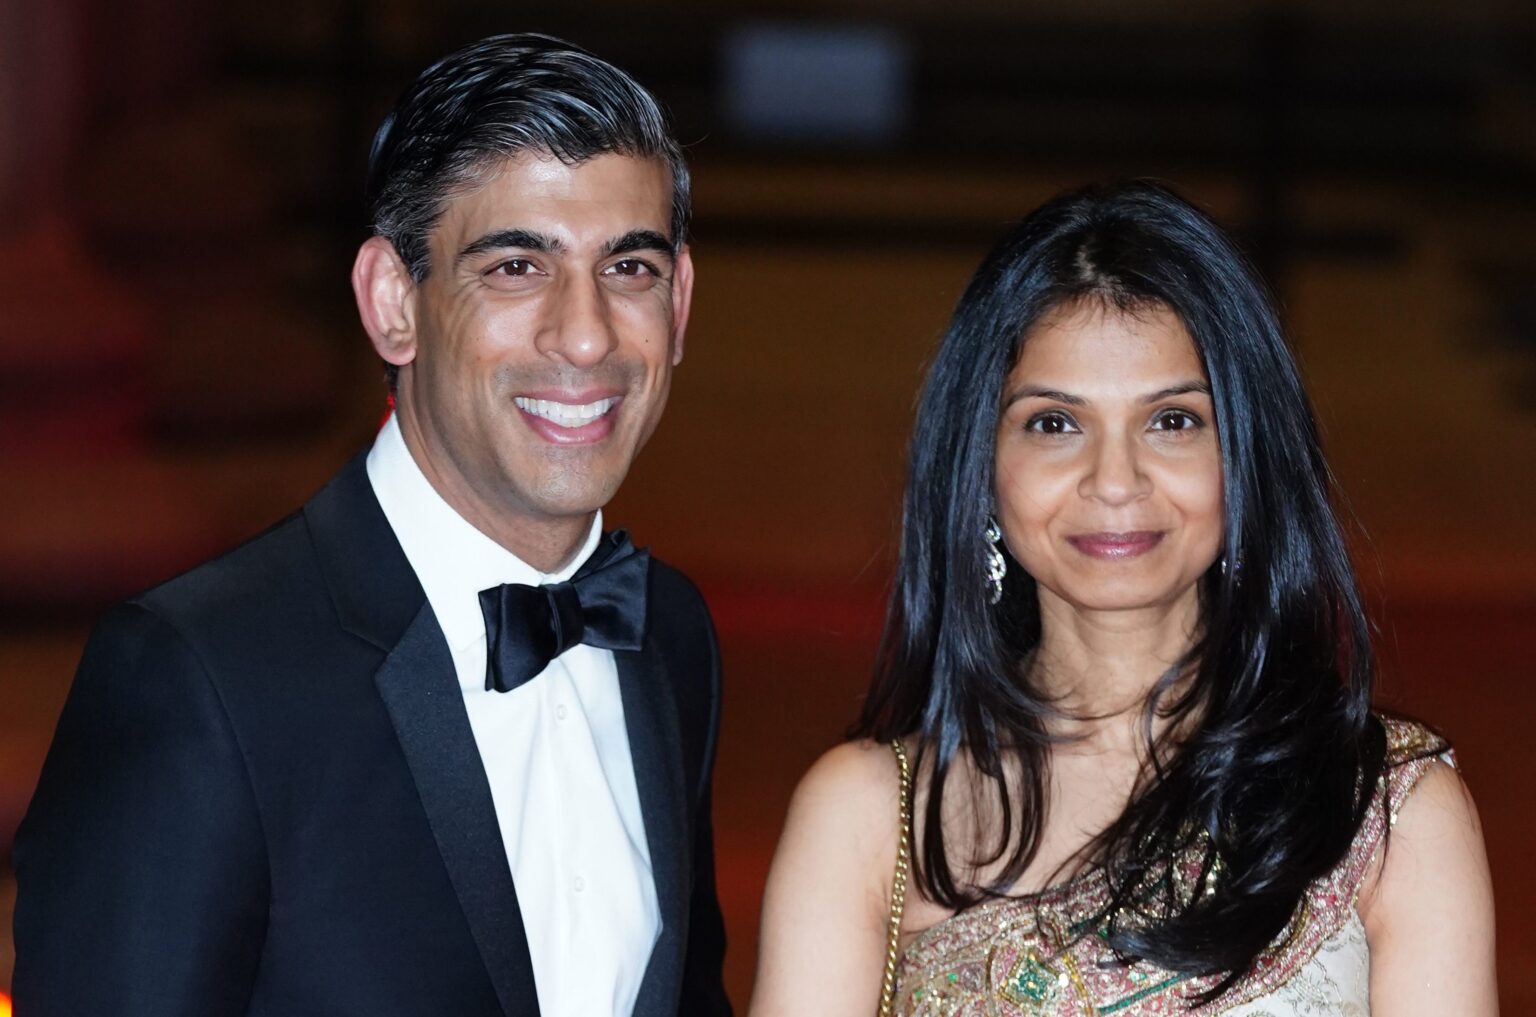 At least he can buy his own wallpaper: Rishi Sunak, the PM who is richer than the King